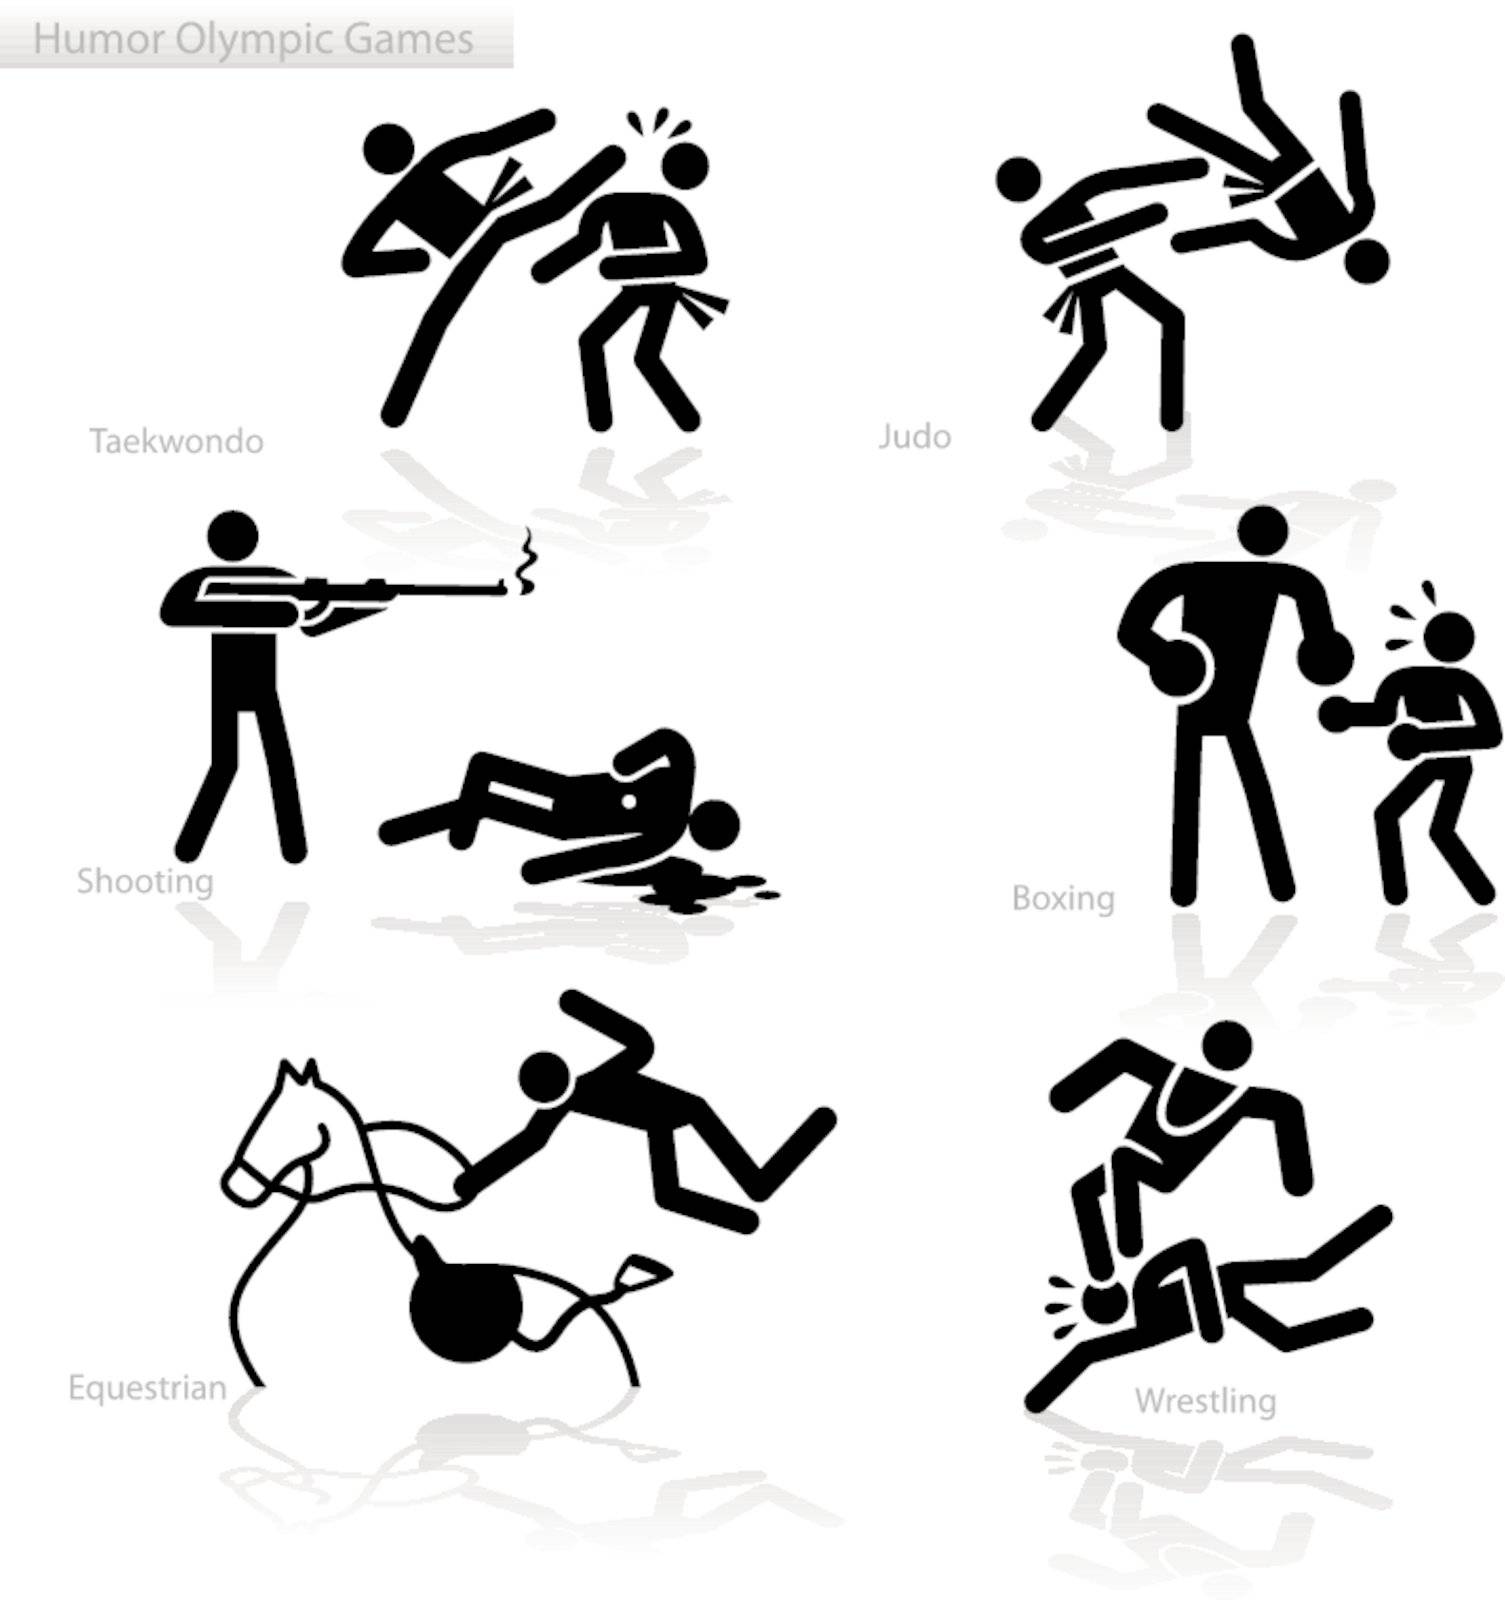 Olympic games see through an humor point of view. Set 4.
In detail: Tae Kwon Do, Judo, shooting, Boxing, Equestrian, Wrestling